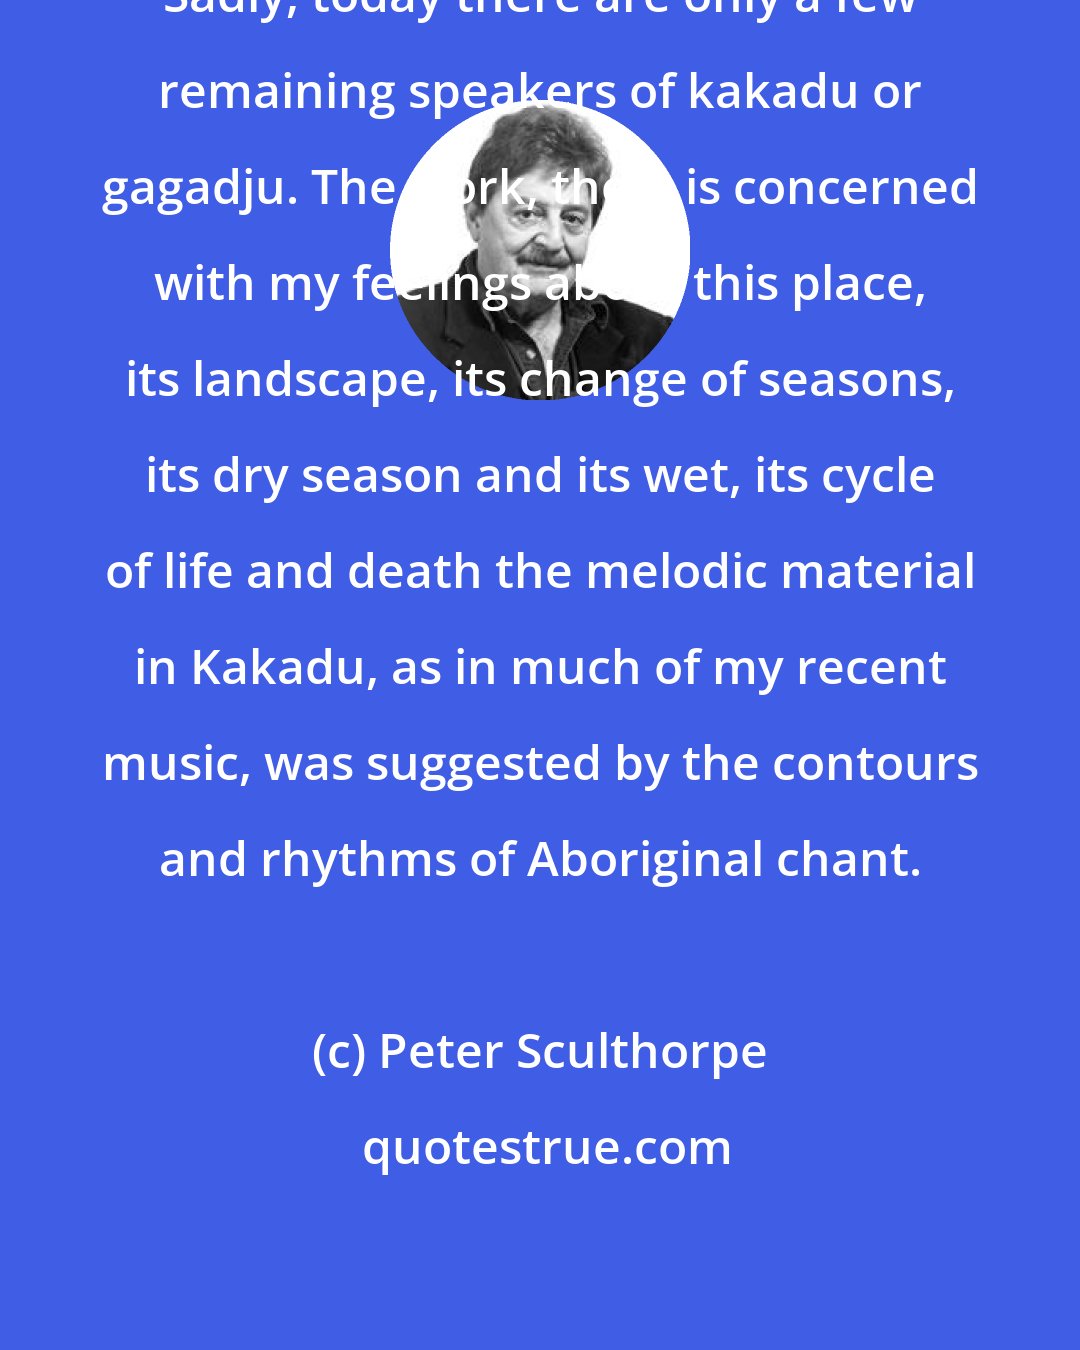 Peter Sculthorpe: Sadly, today there are only a few remaining speakers of kakadu or gagadju. The work, then, is concerned with my feelings about this place, its landscape, its change of seasons, its dry season and its wet, its cycle of life and death the melodic material in Kakadu, as in much of my recent music, was suggested by the contours and rhythms of Aboriginal chant.